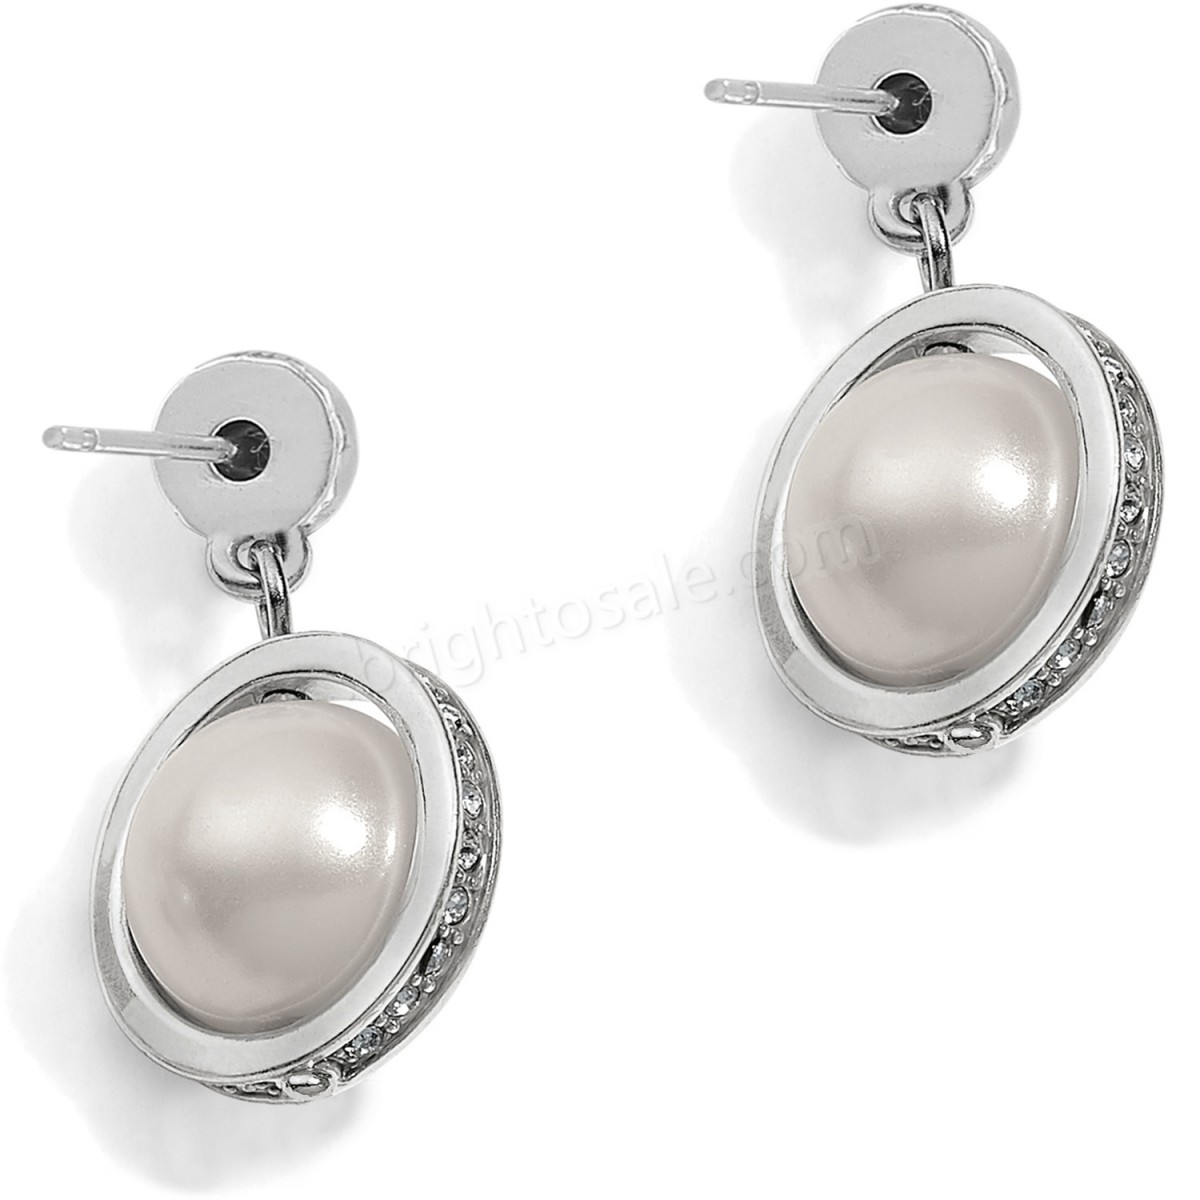 Brighton Collectibles & Online Discount Chara Ellipse Spin Post Drop Earrings - -1